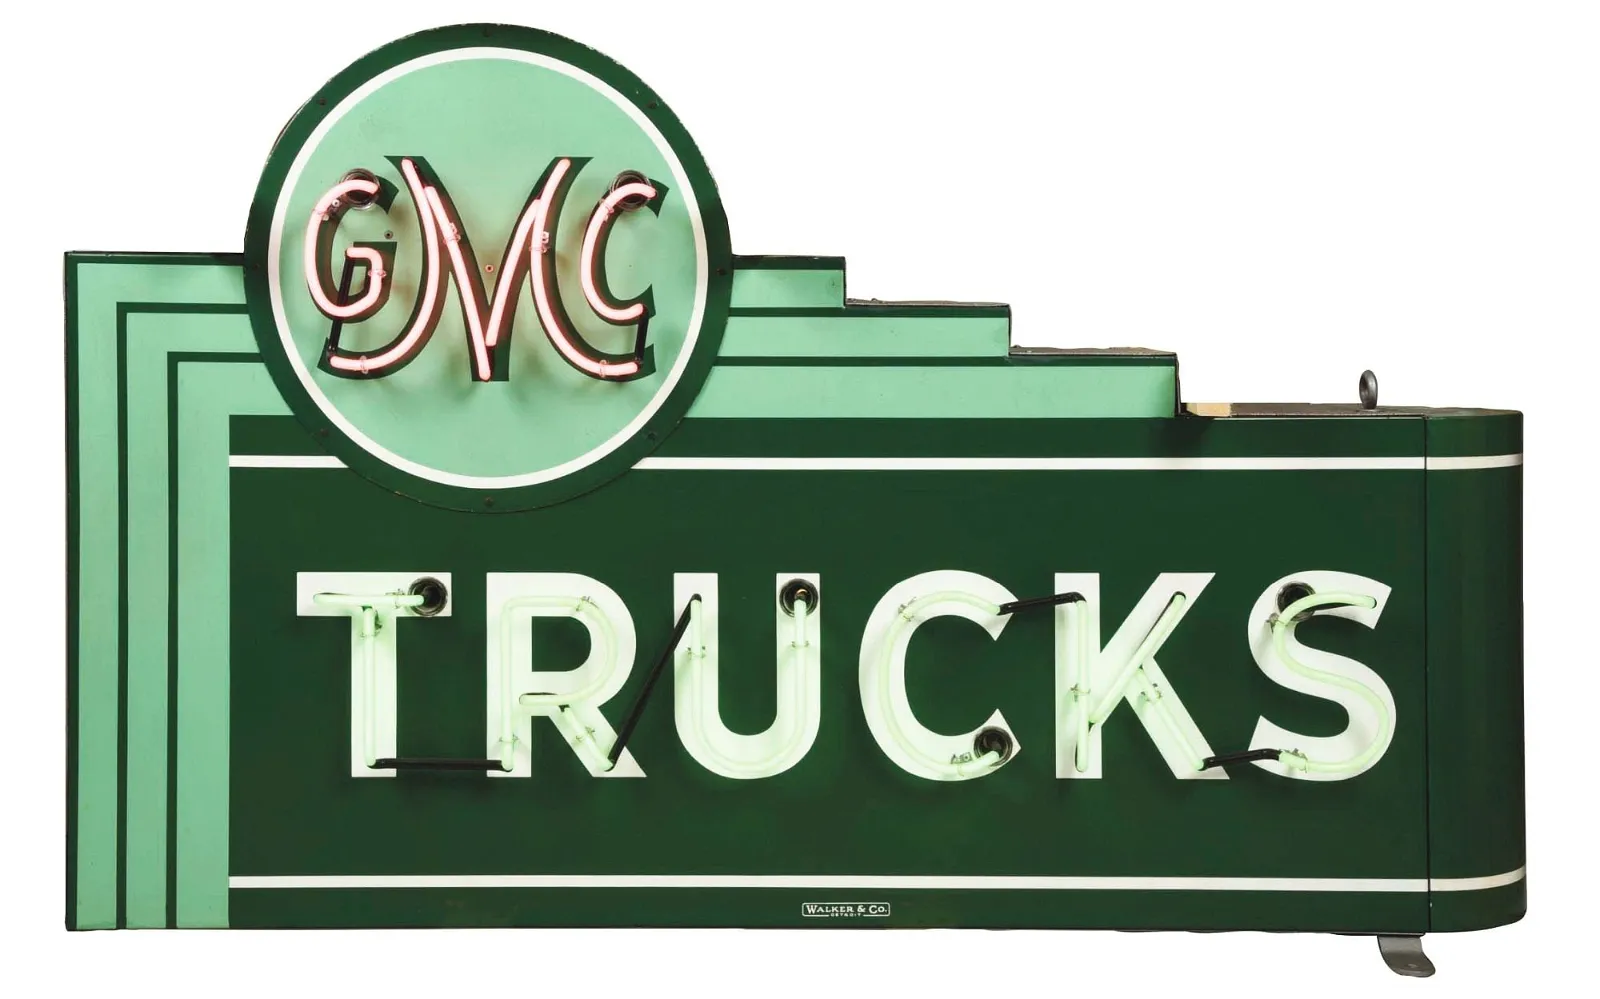 GMC Trucks neon sign, which sold for $56,580 at Morphy.